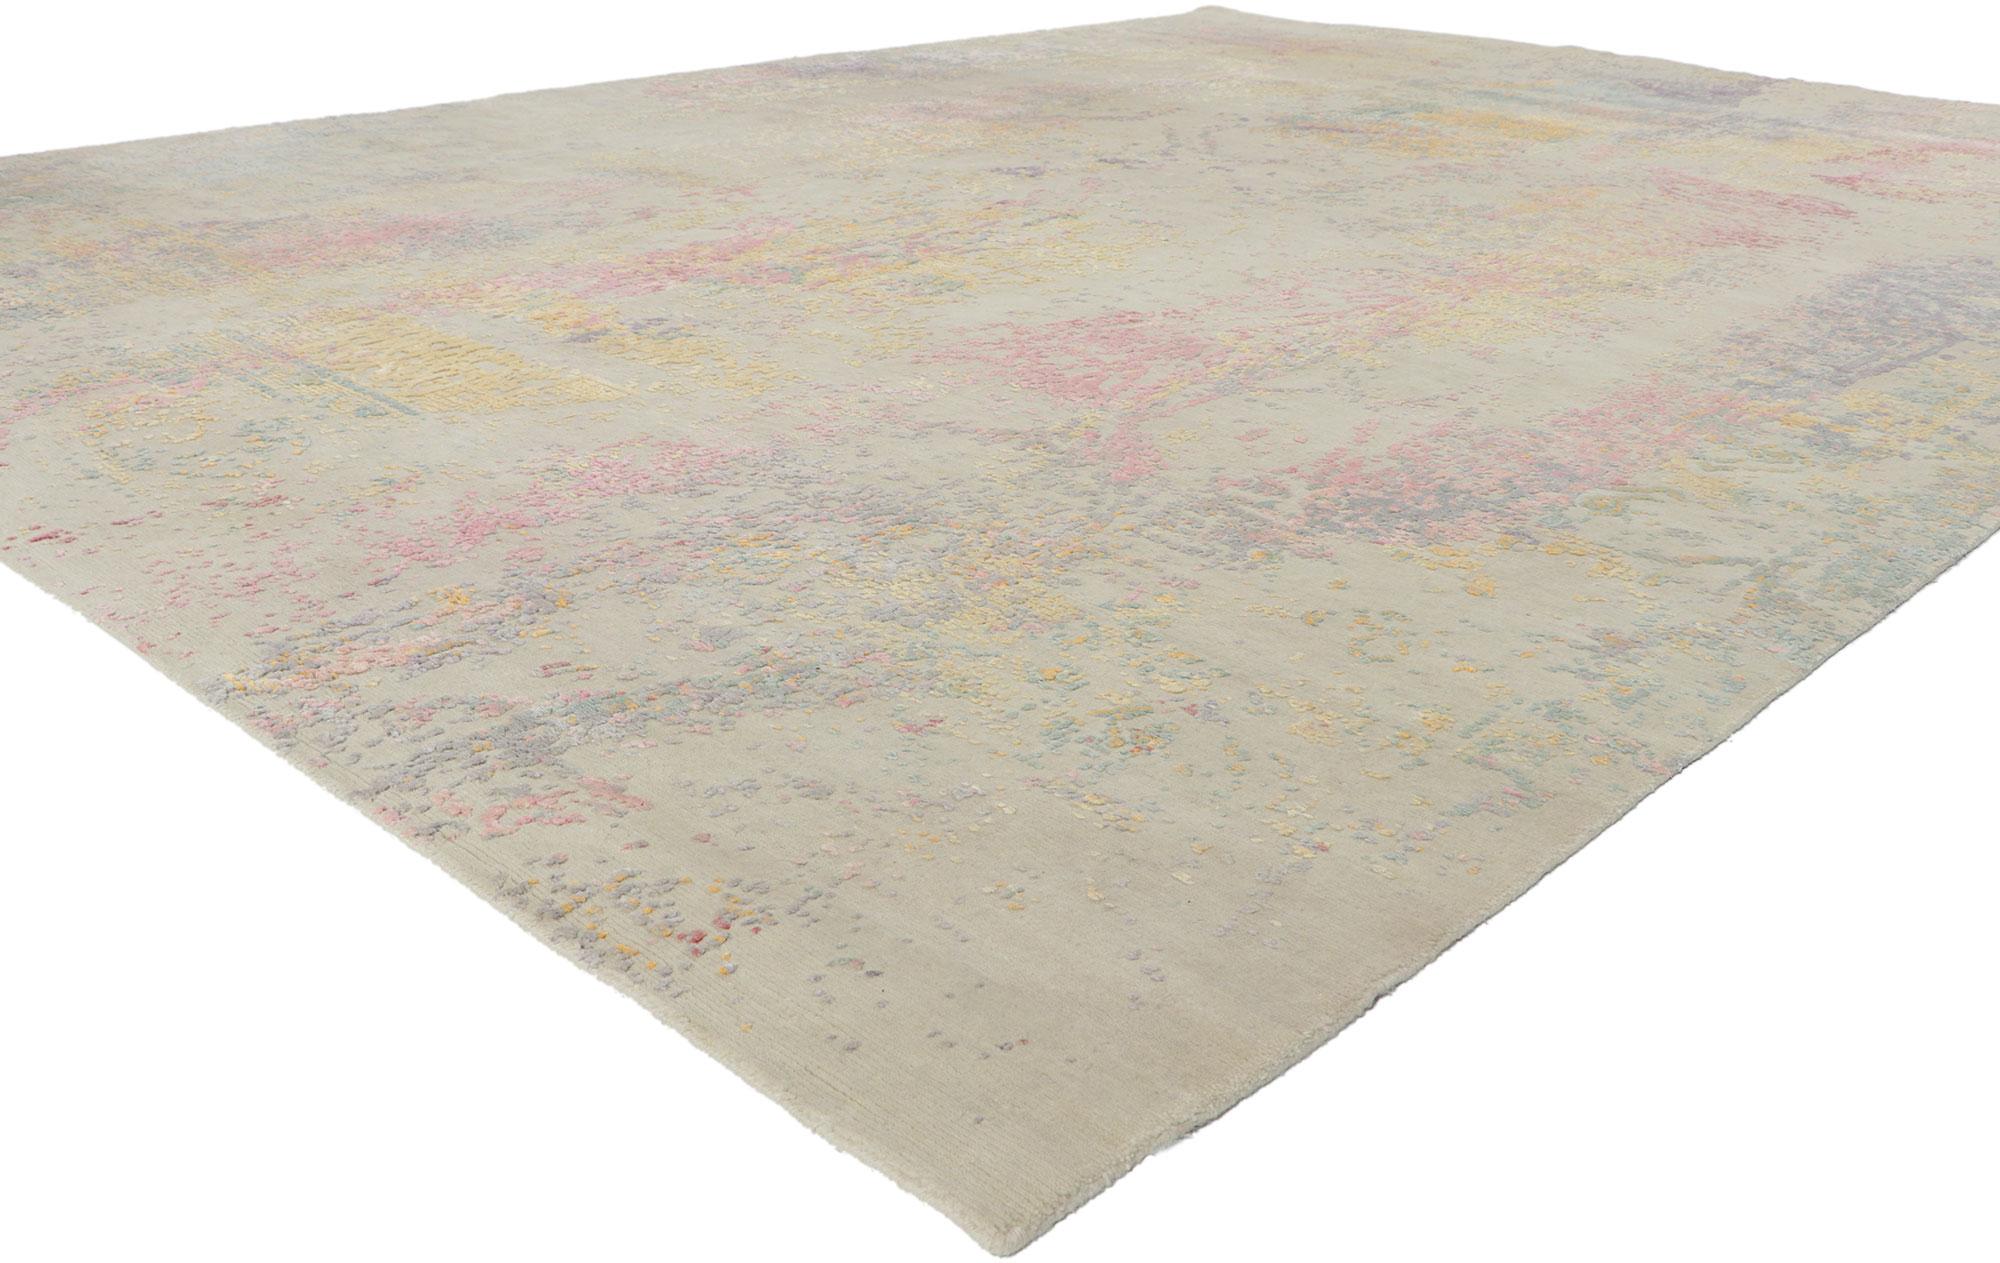 30872 New Contemporary Abstract rug inspired by Helen Frankenthaler, 09'01 x 11'11. Showcasing a modern style and raised silk design with incredible detail and texture, this hand knotted contemporary textured rug is a captivating vision of woven